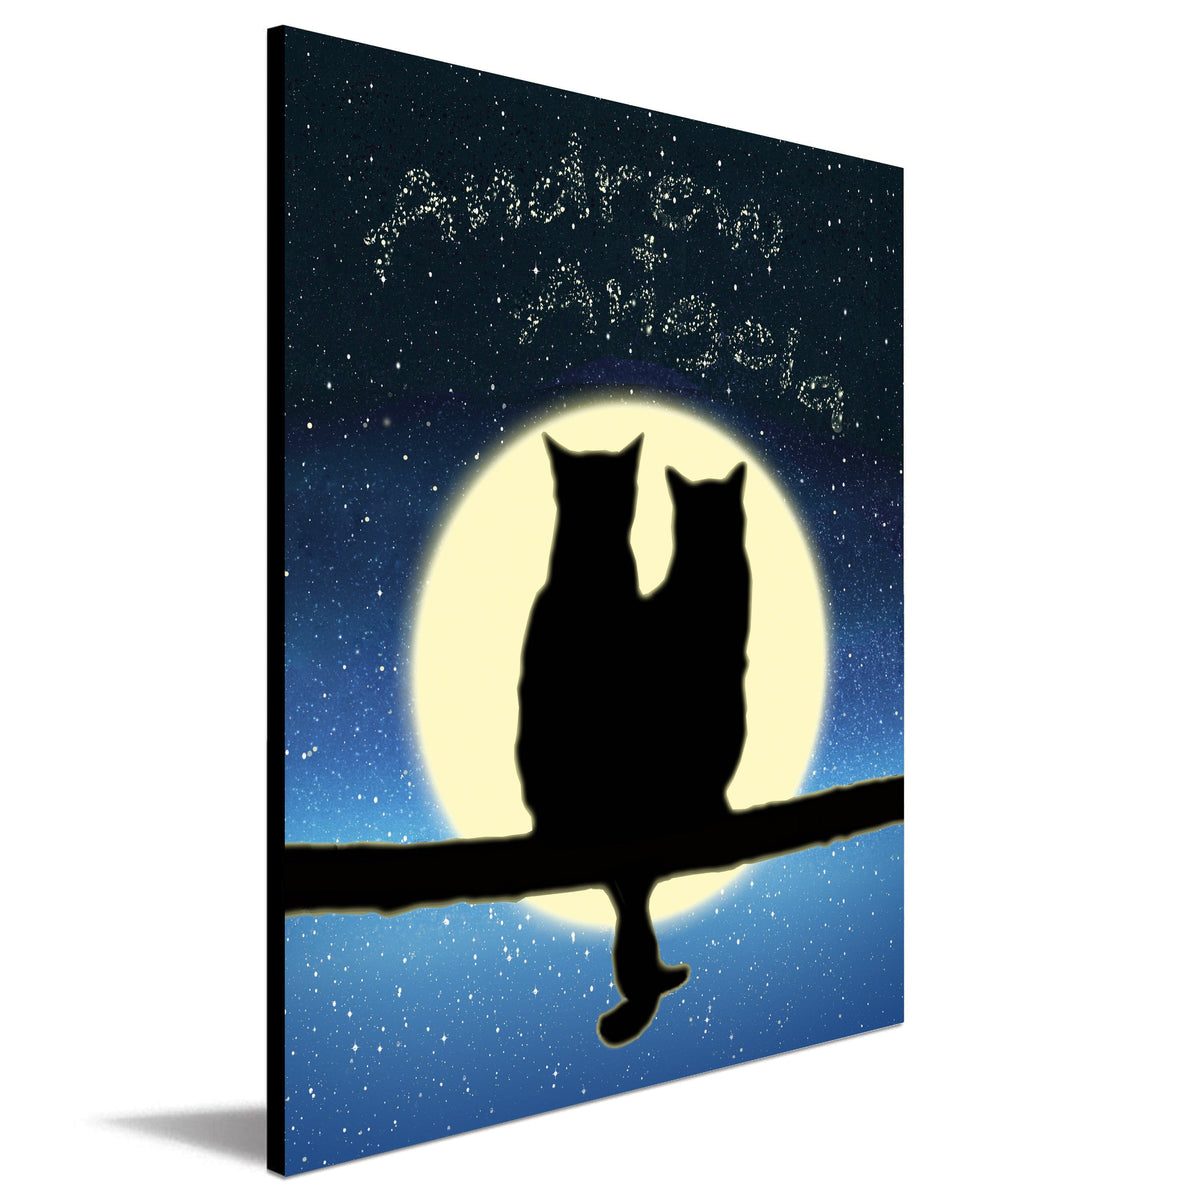 Personalized gift for the cat lover - Wood sign option